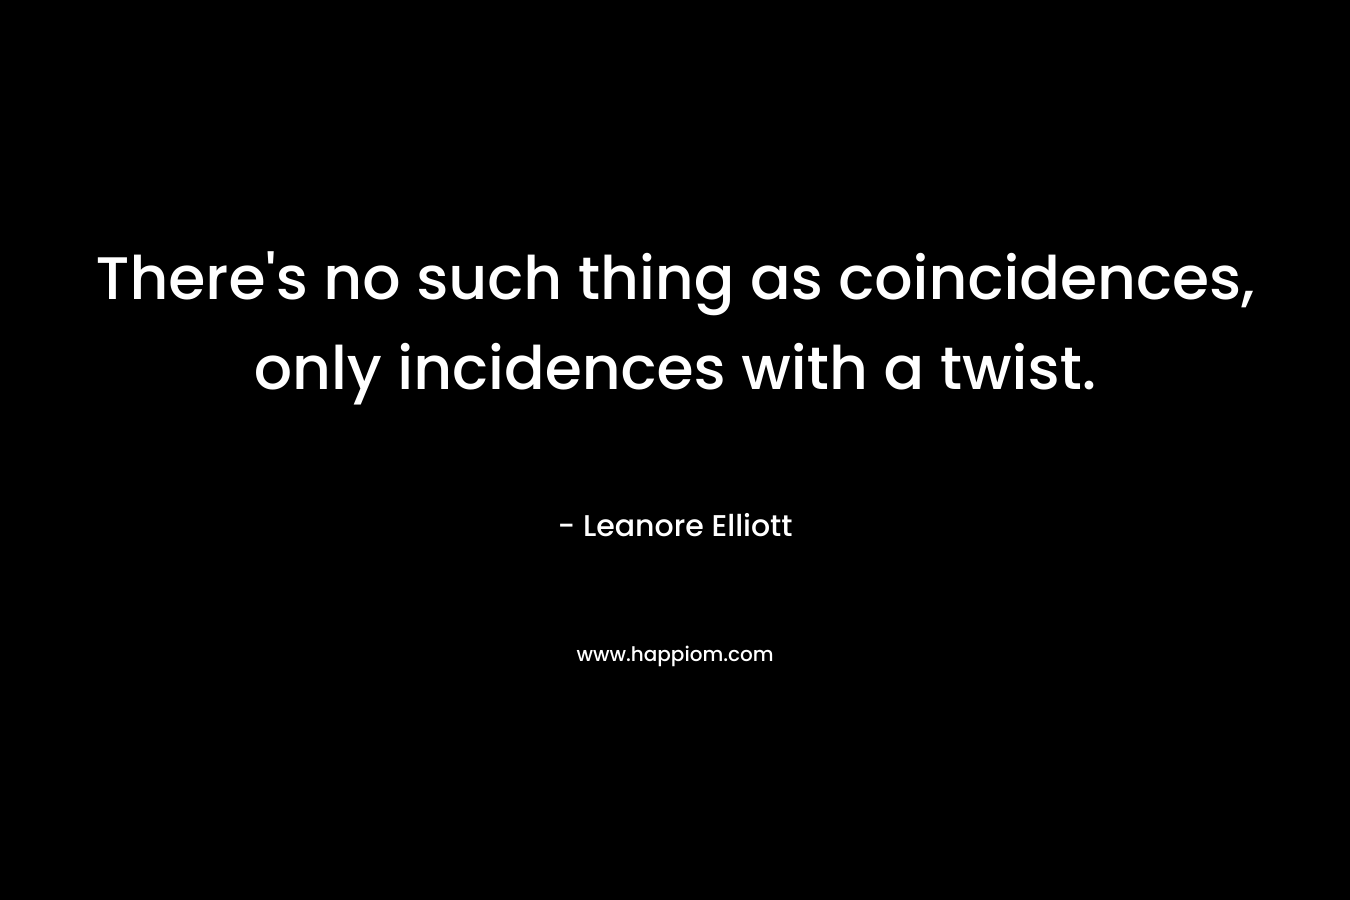 There’s no such thing as coincidences, only incidences with a twist. – Leanore Elliott